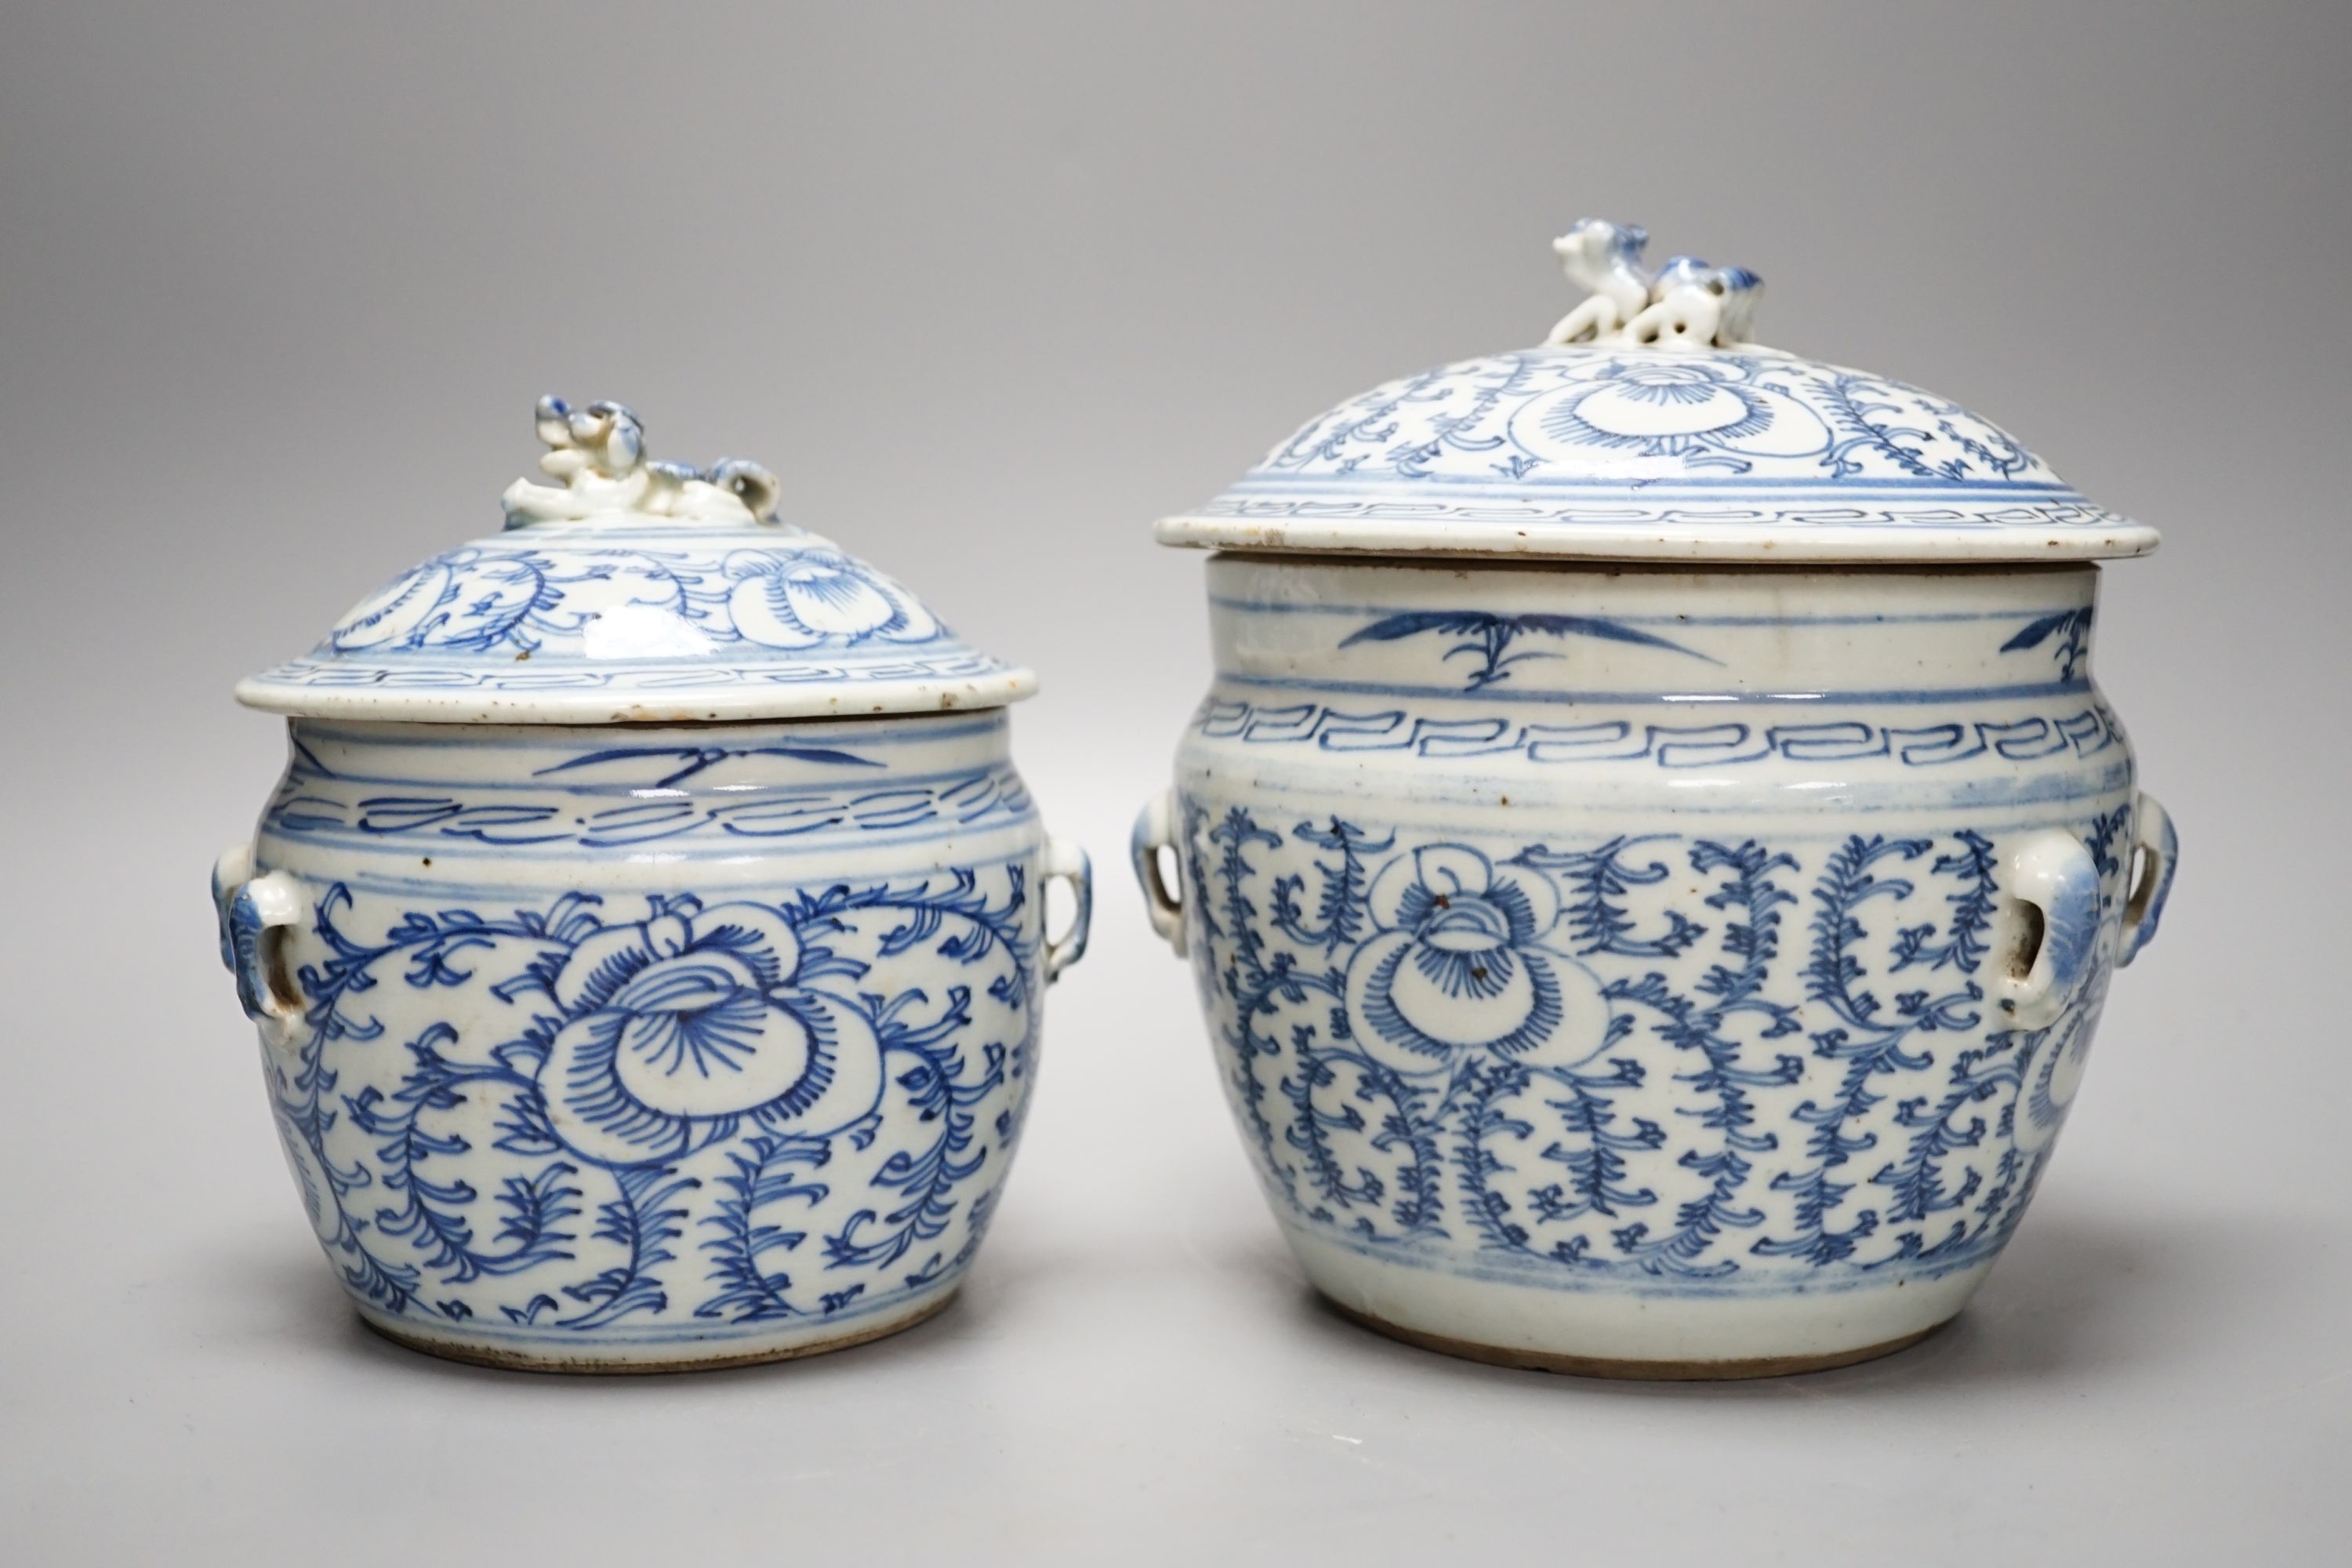 Two Chinese blue and white jars and covers - tallest 20cm high